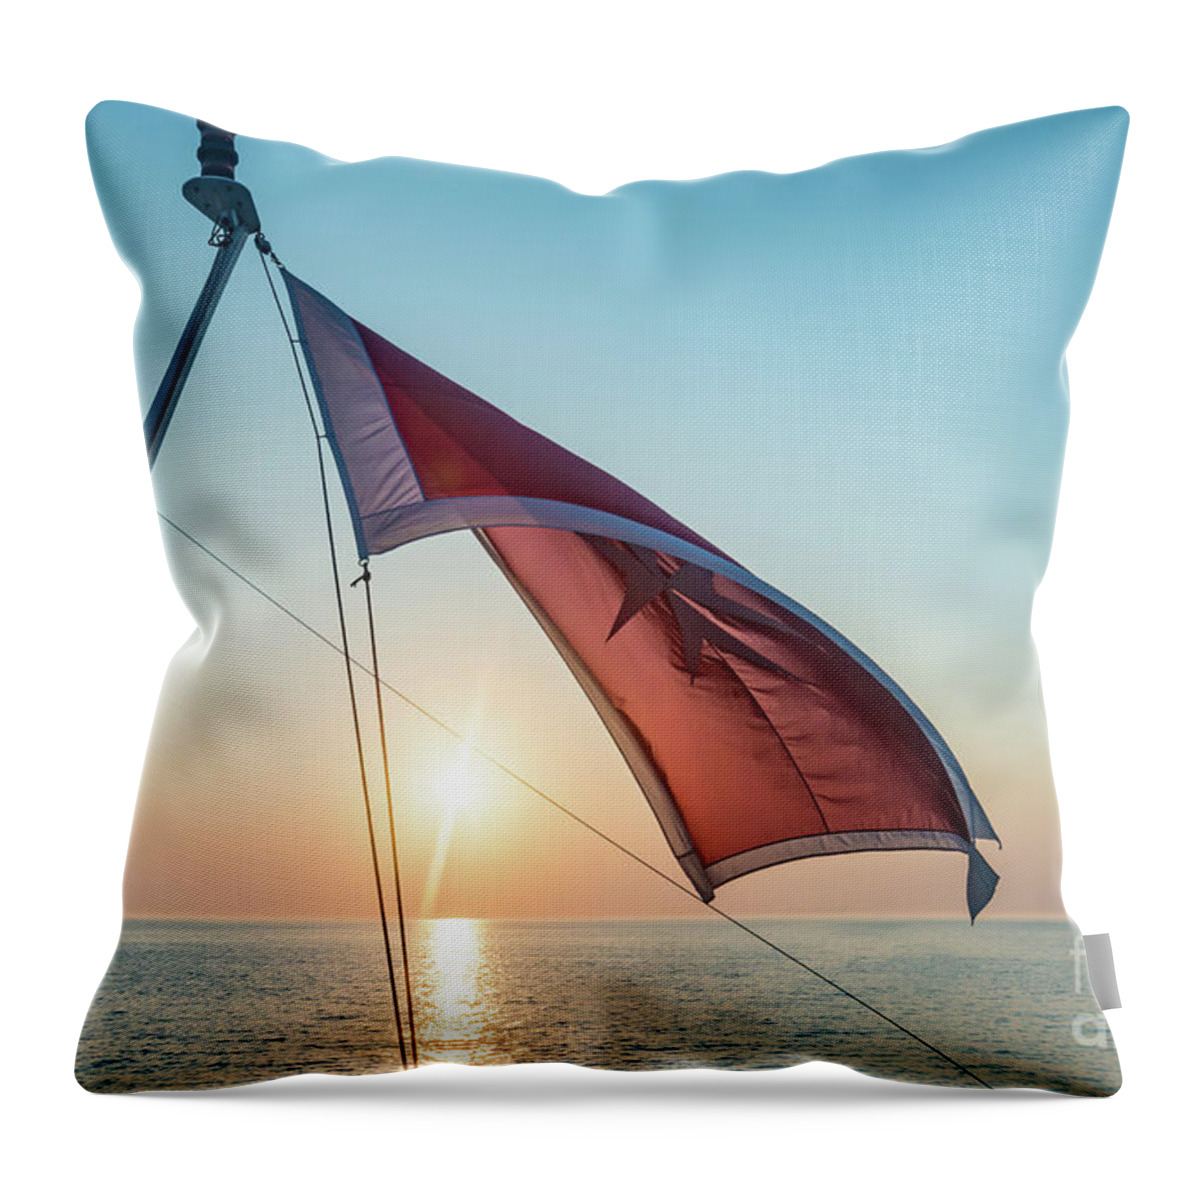 Aegis Throw Pillow featuring the photograph Sunrise At The Horizont by Hannes Cmarits